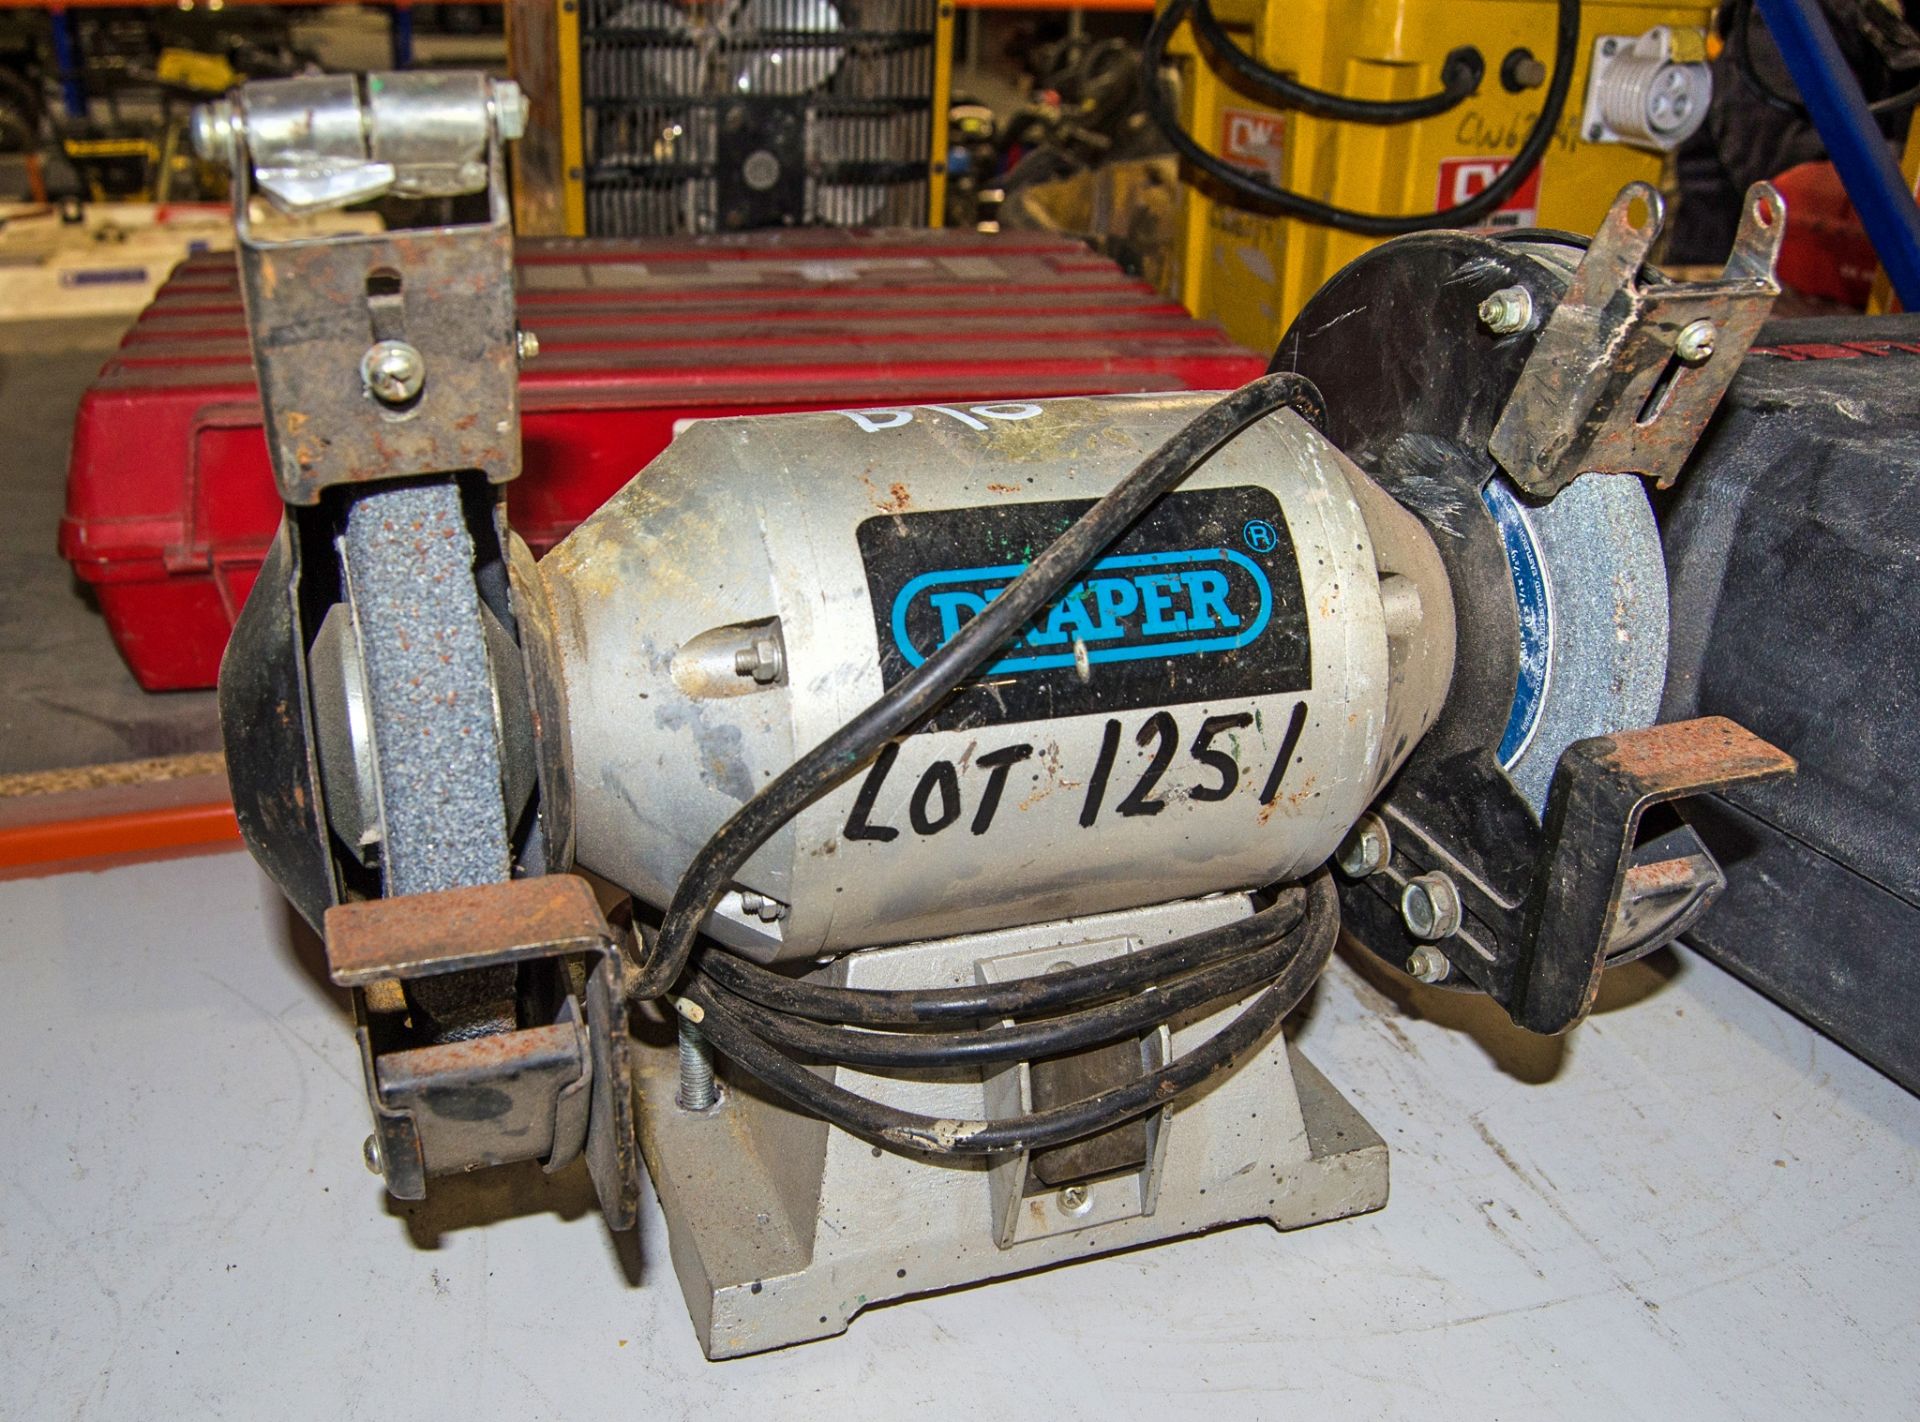 Draper 240v bench grinder ** No VAT on hammer but VAT will be charged on buyer's premium **